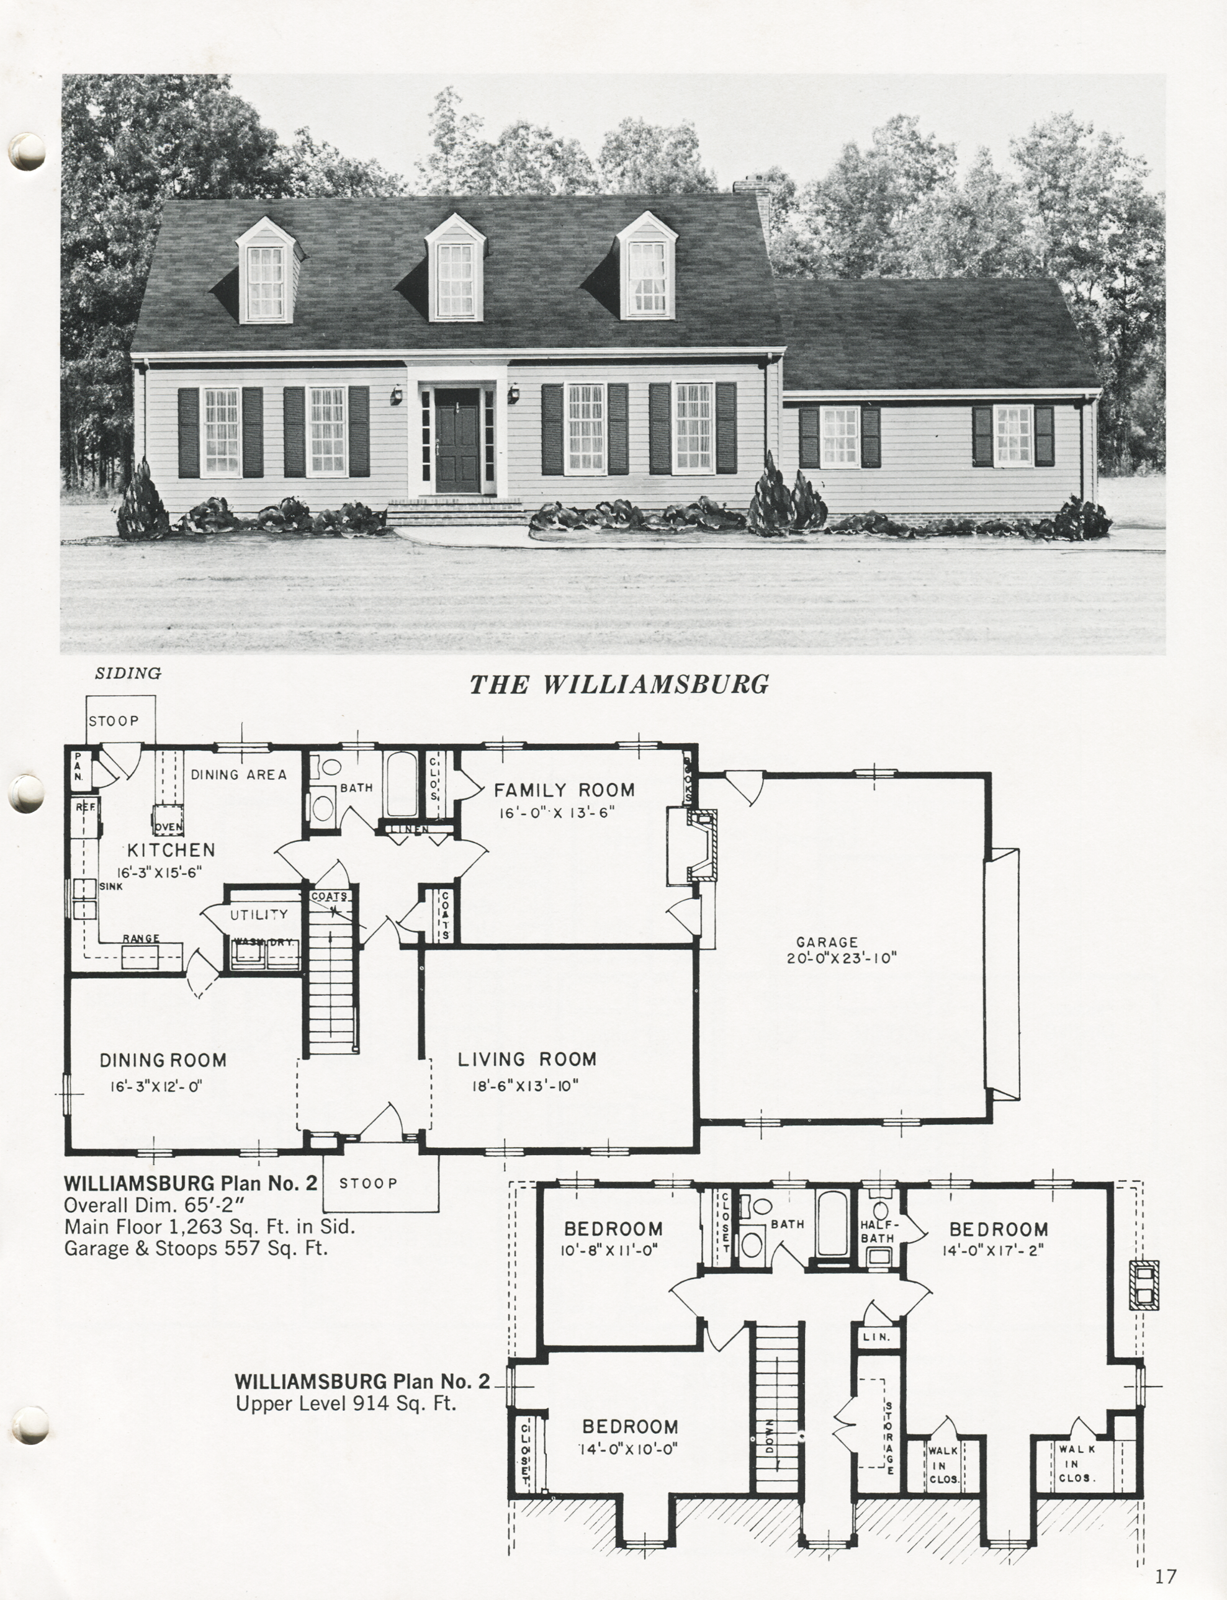 United States, c. 1970 The Williamsburg A house based on